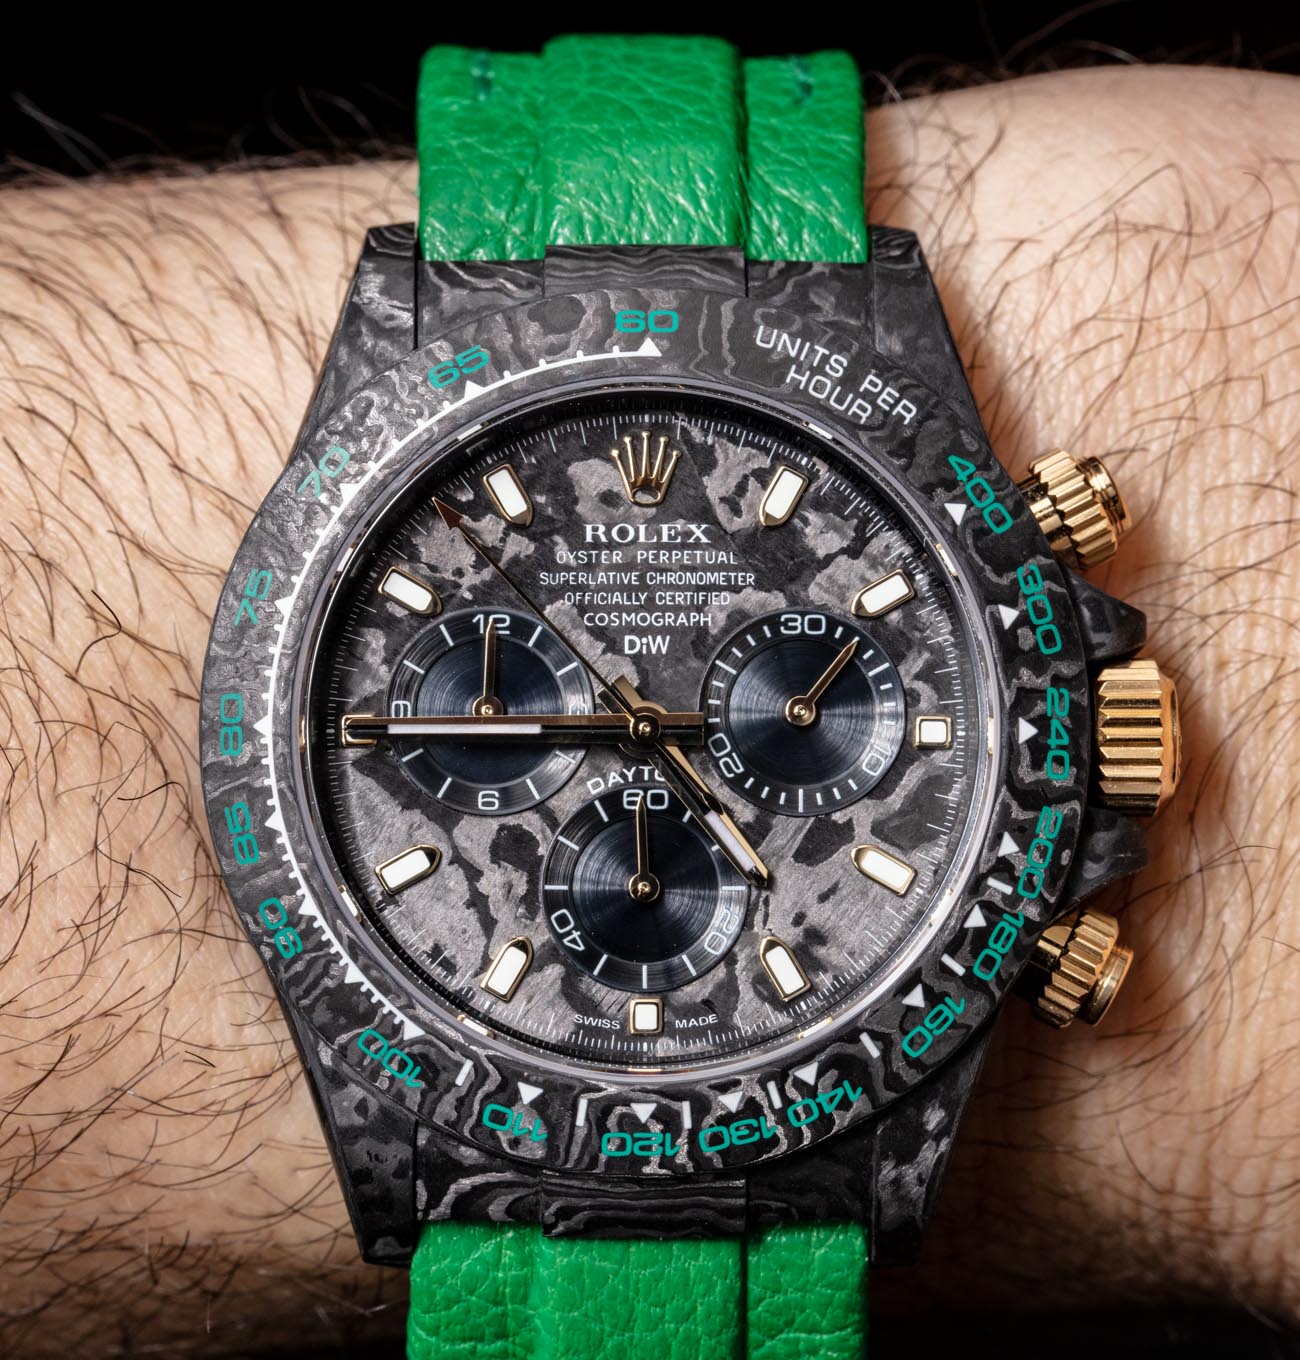 Hands-On With A Designa Individual Carbon Daytona & Feelings About Customized Rolex | aBlogtoWatch